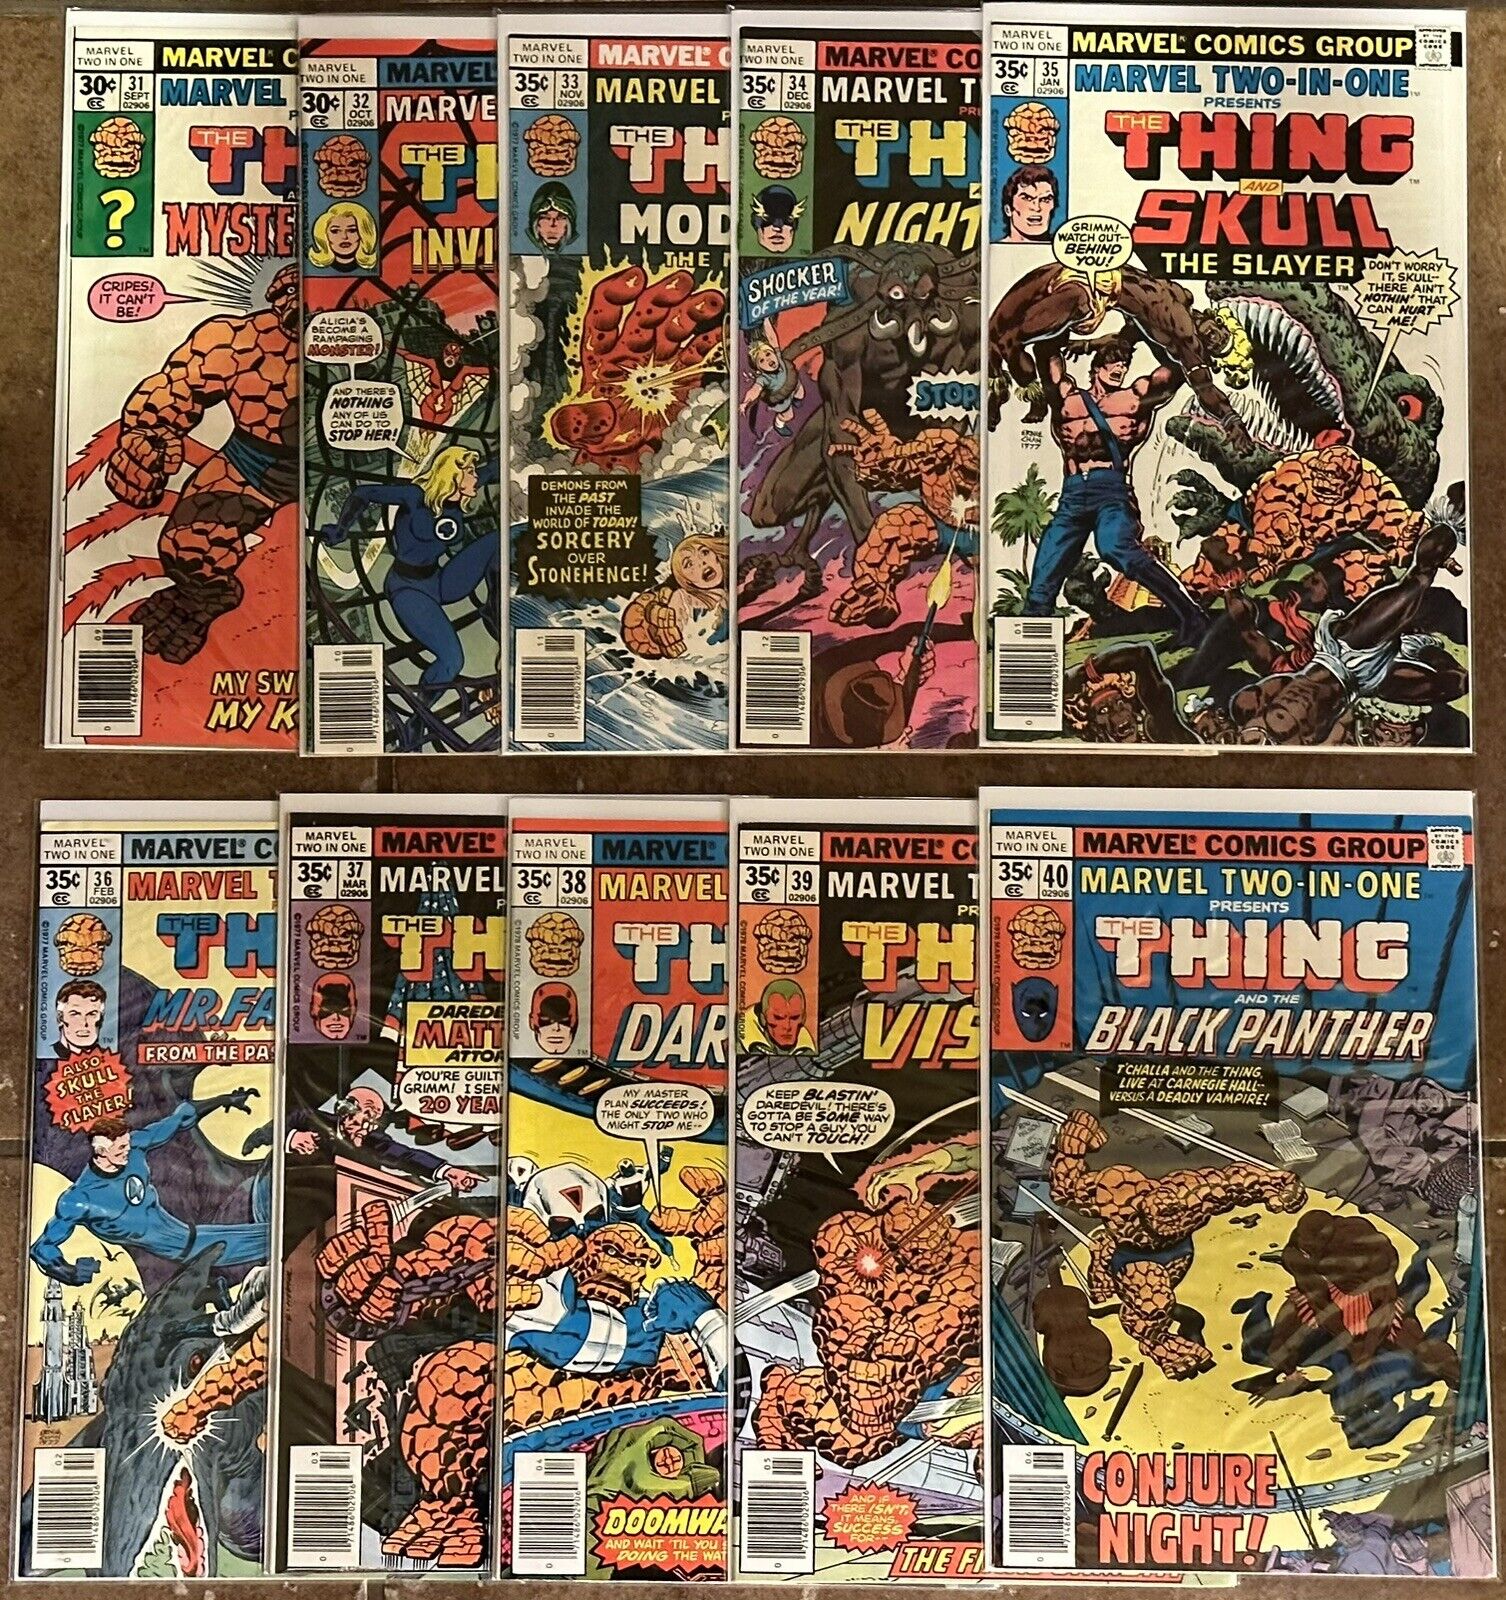 Marvel Two-In-One (1973) - 10 issue Bronze Age lot #31-40